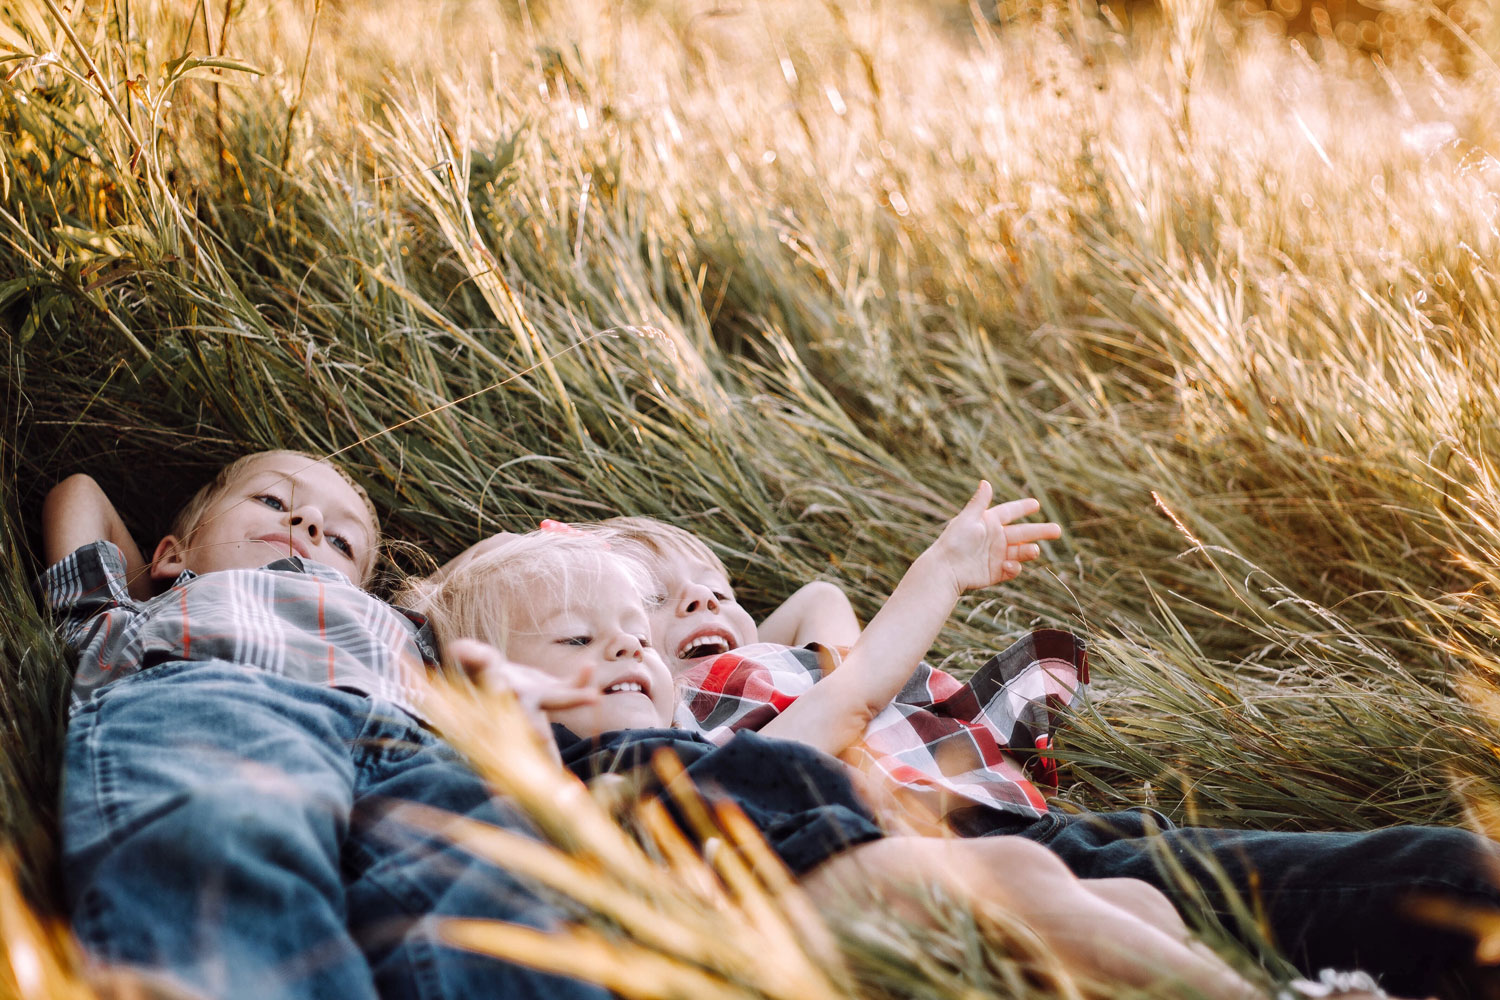 Kids laying in the tall grass together